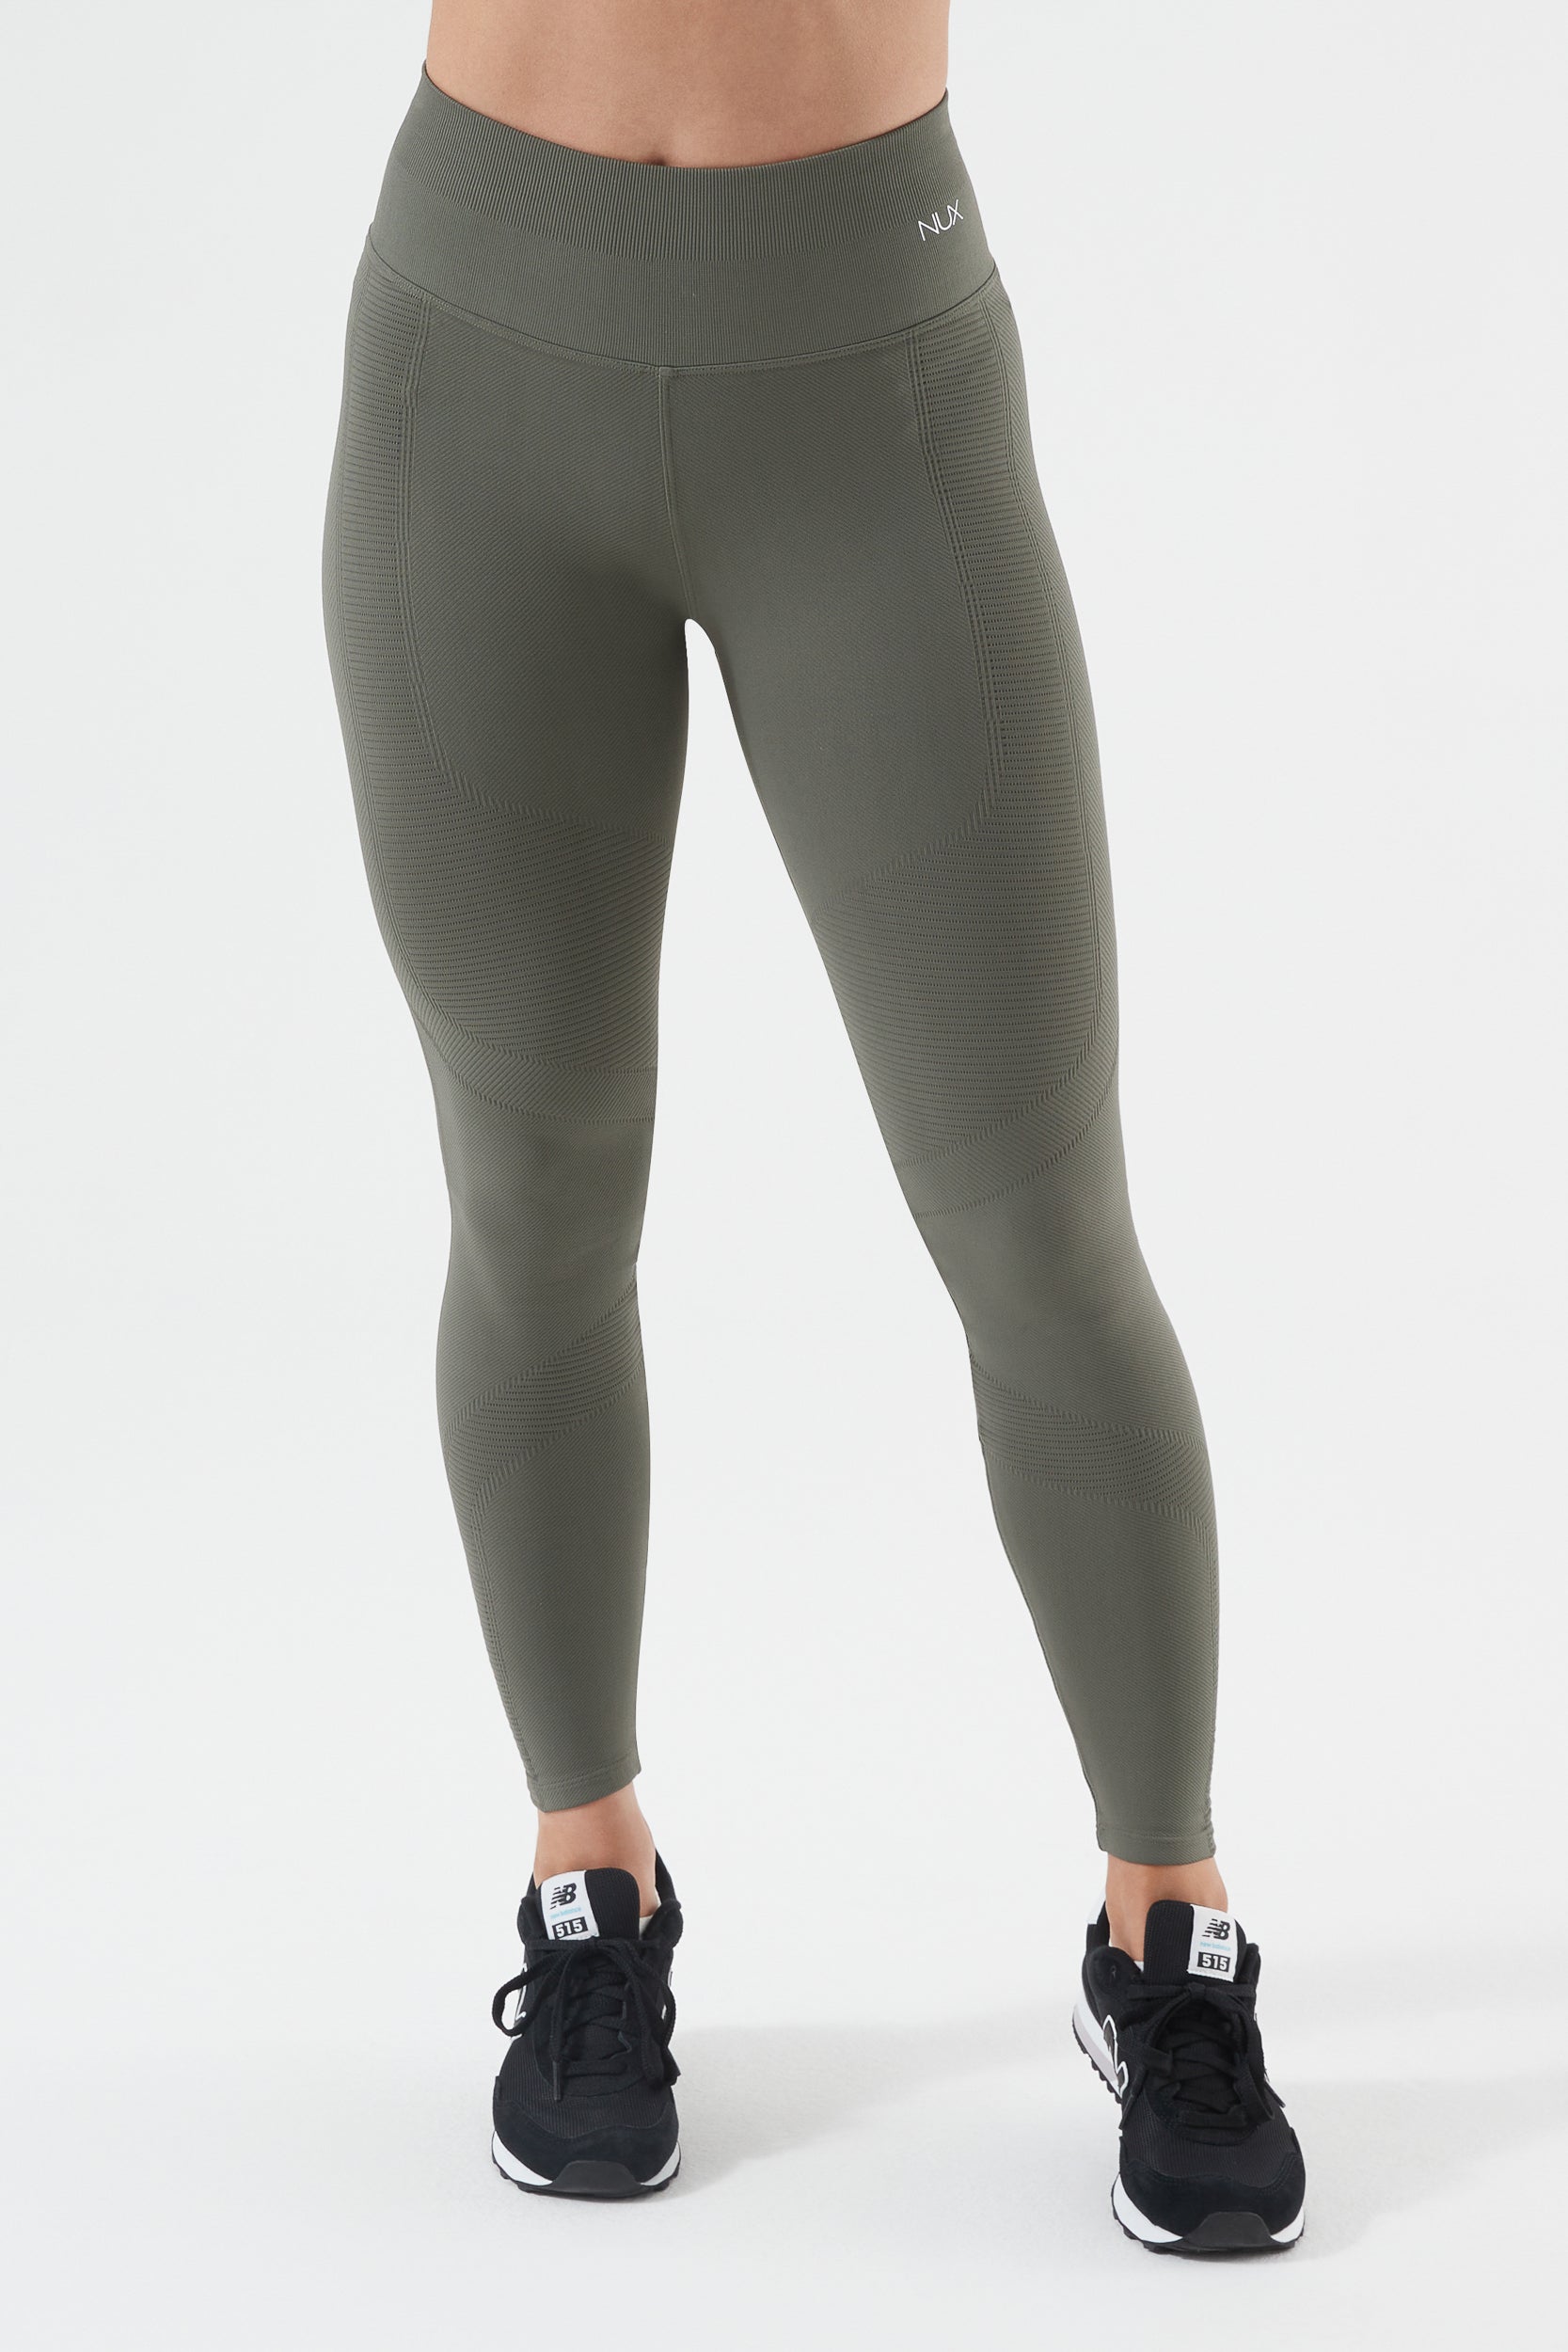 NUX Active Women's Body Engineered® One By One Legging